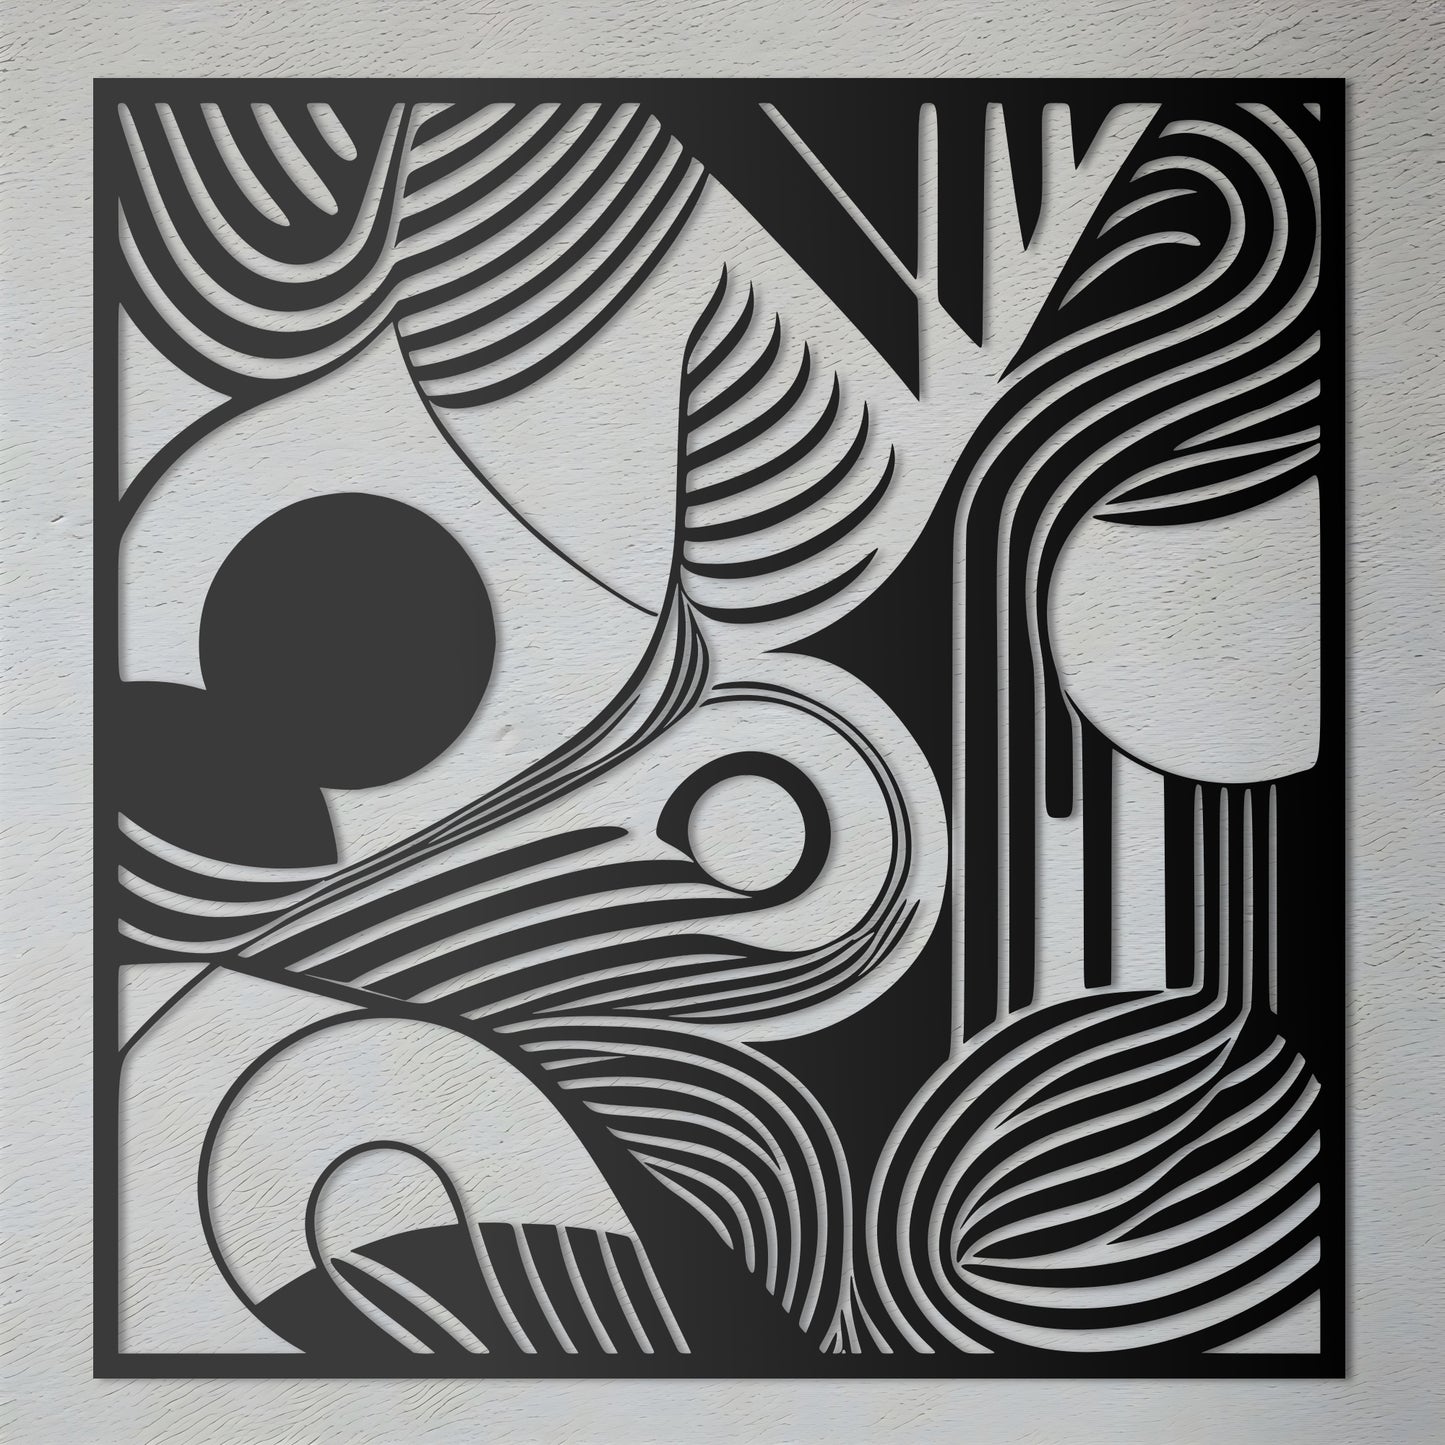 Organic Flow - Abstract Metal Wall Art Inspired by Victor Vasarely